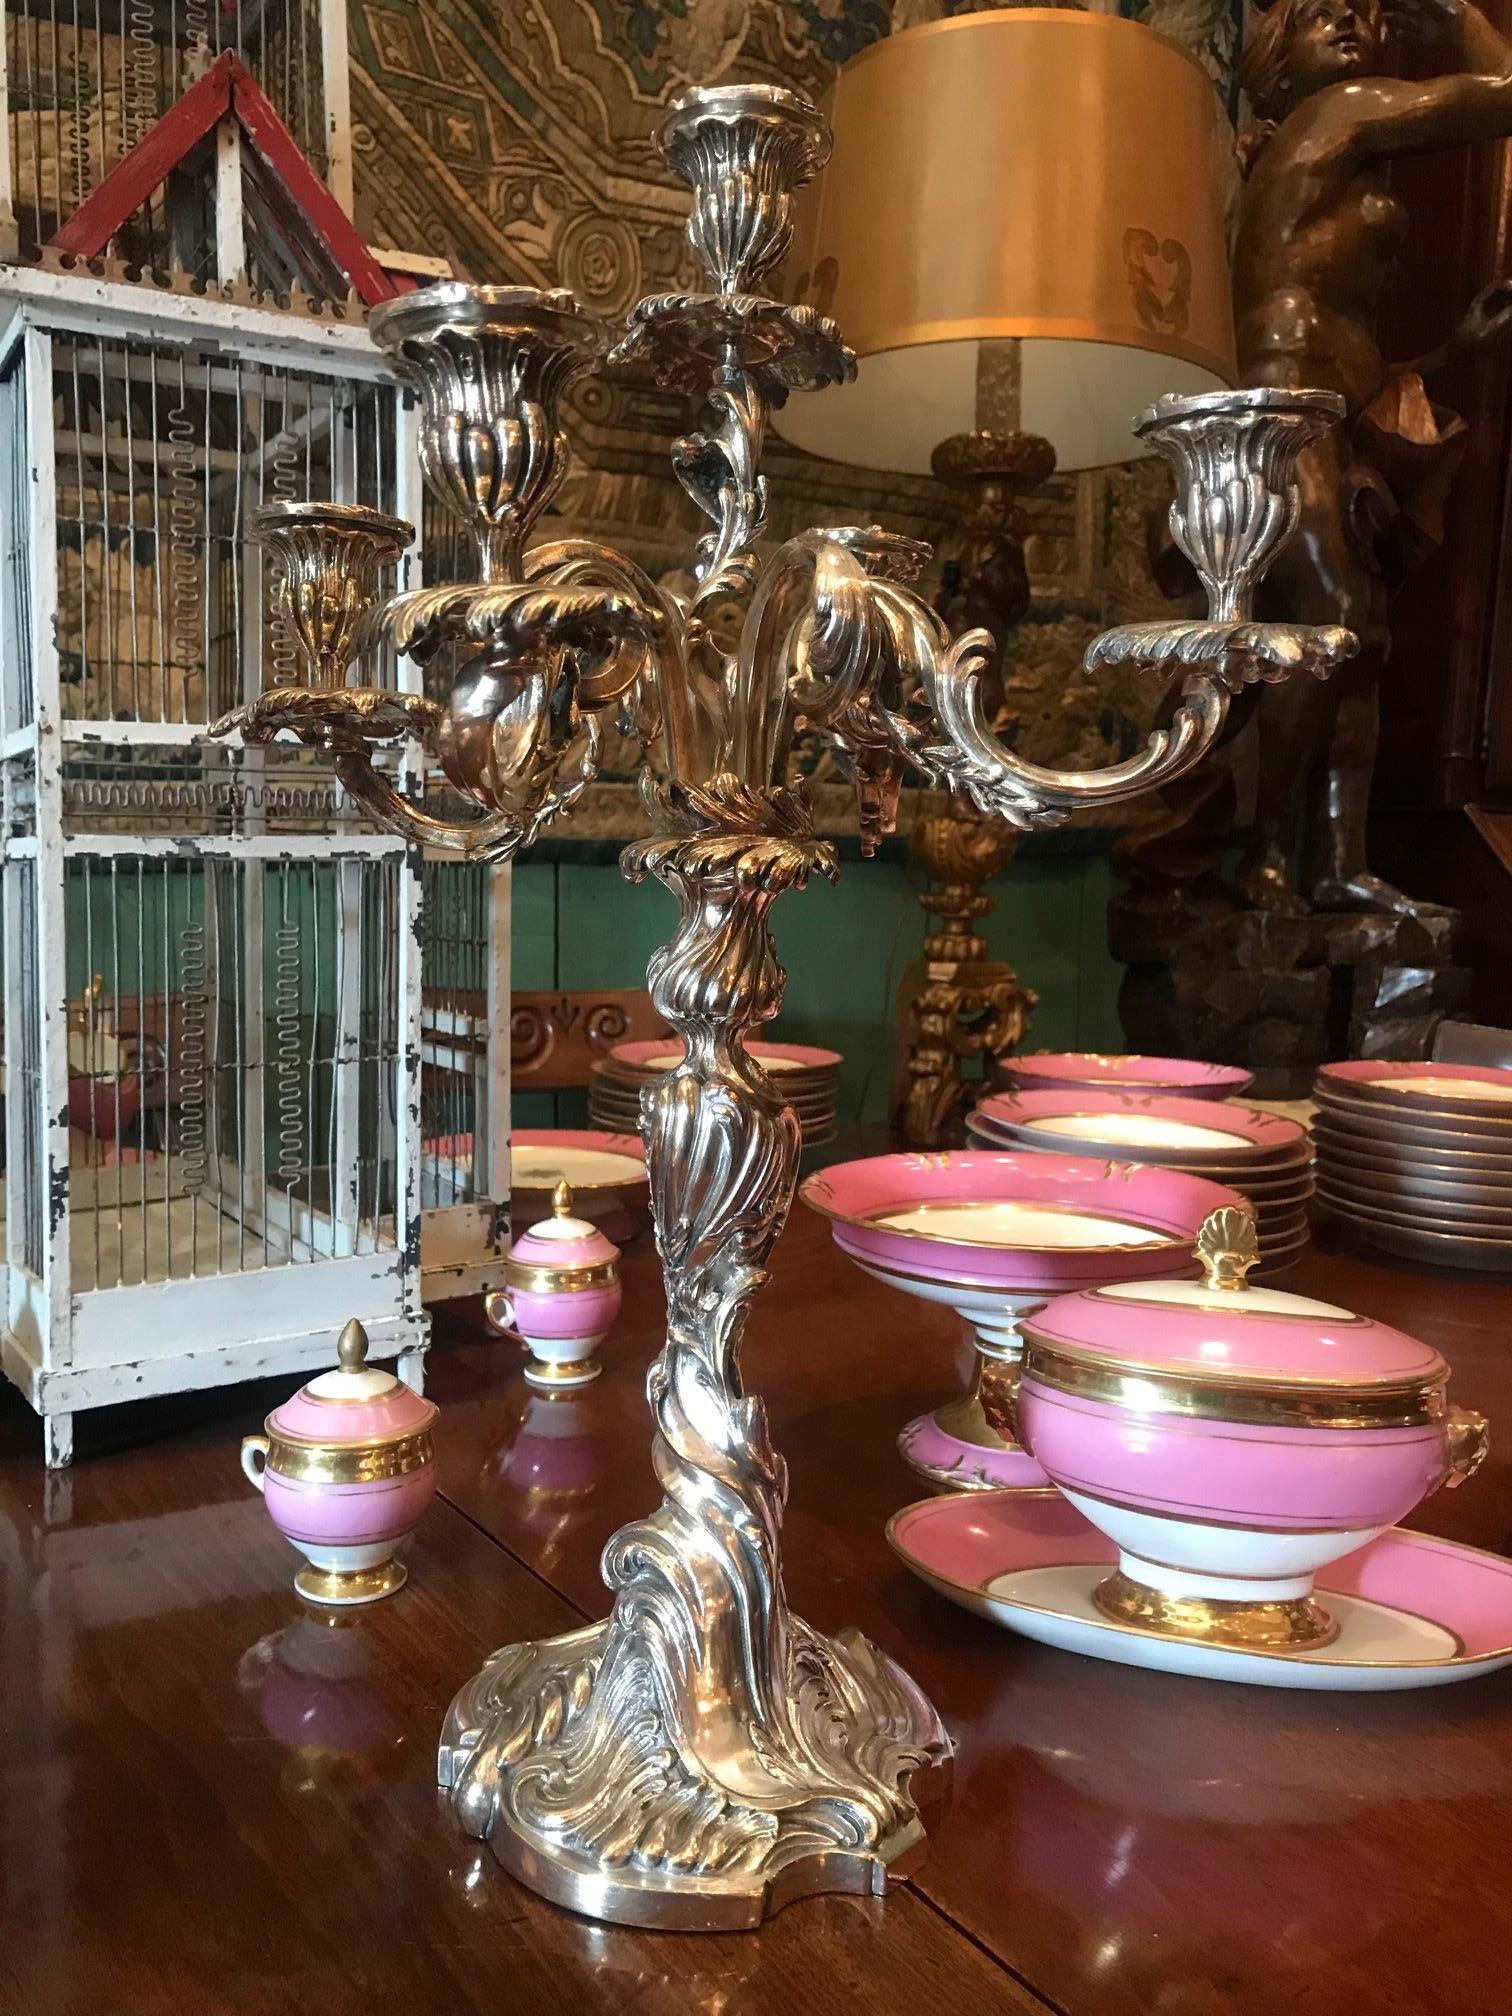 A very beautiful French large pair of late 19th century early 20th century candleholders candelabra silver plated. Antique Dealer Los Angeles CA Beverly Hills West Hollywood Melrose. This pair would be the perfect companion to you dinnerware